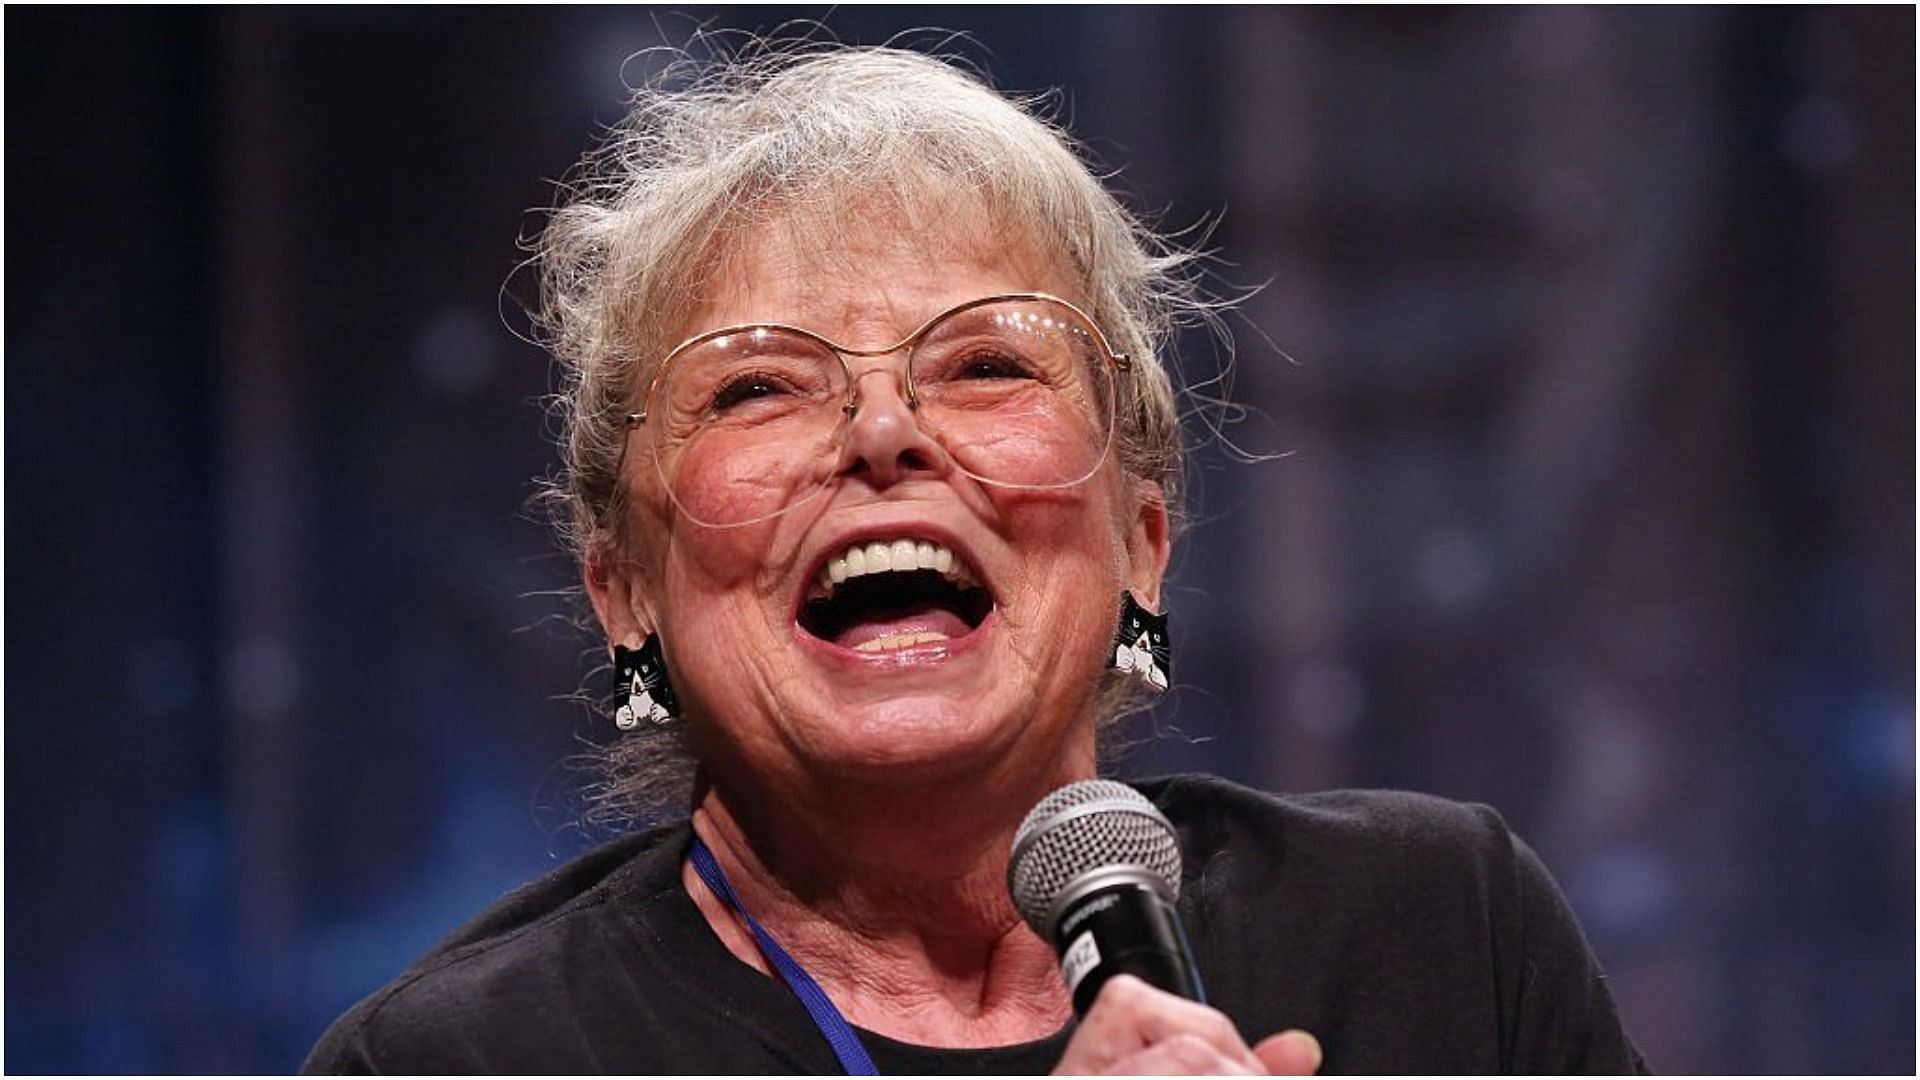 Laurel Goodwin recently dies at the age of 79 (Image via Gabe Ginsberg/Getty Images)